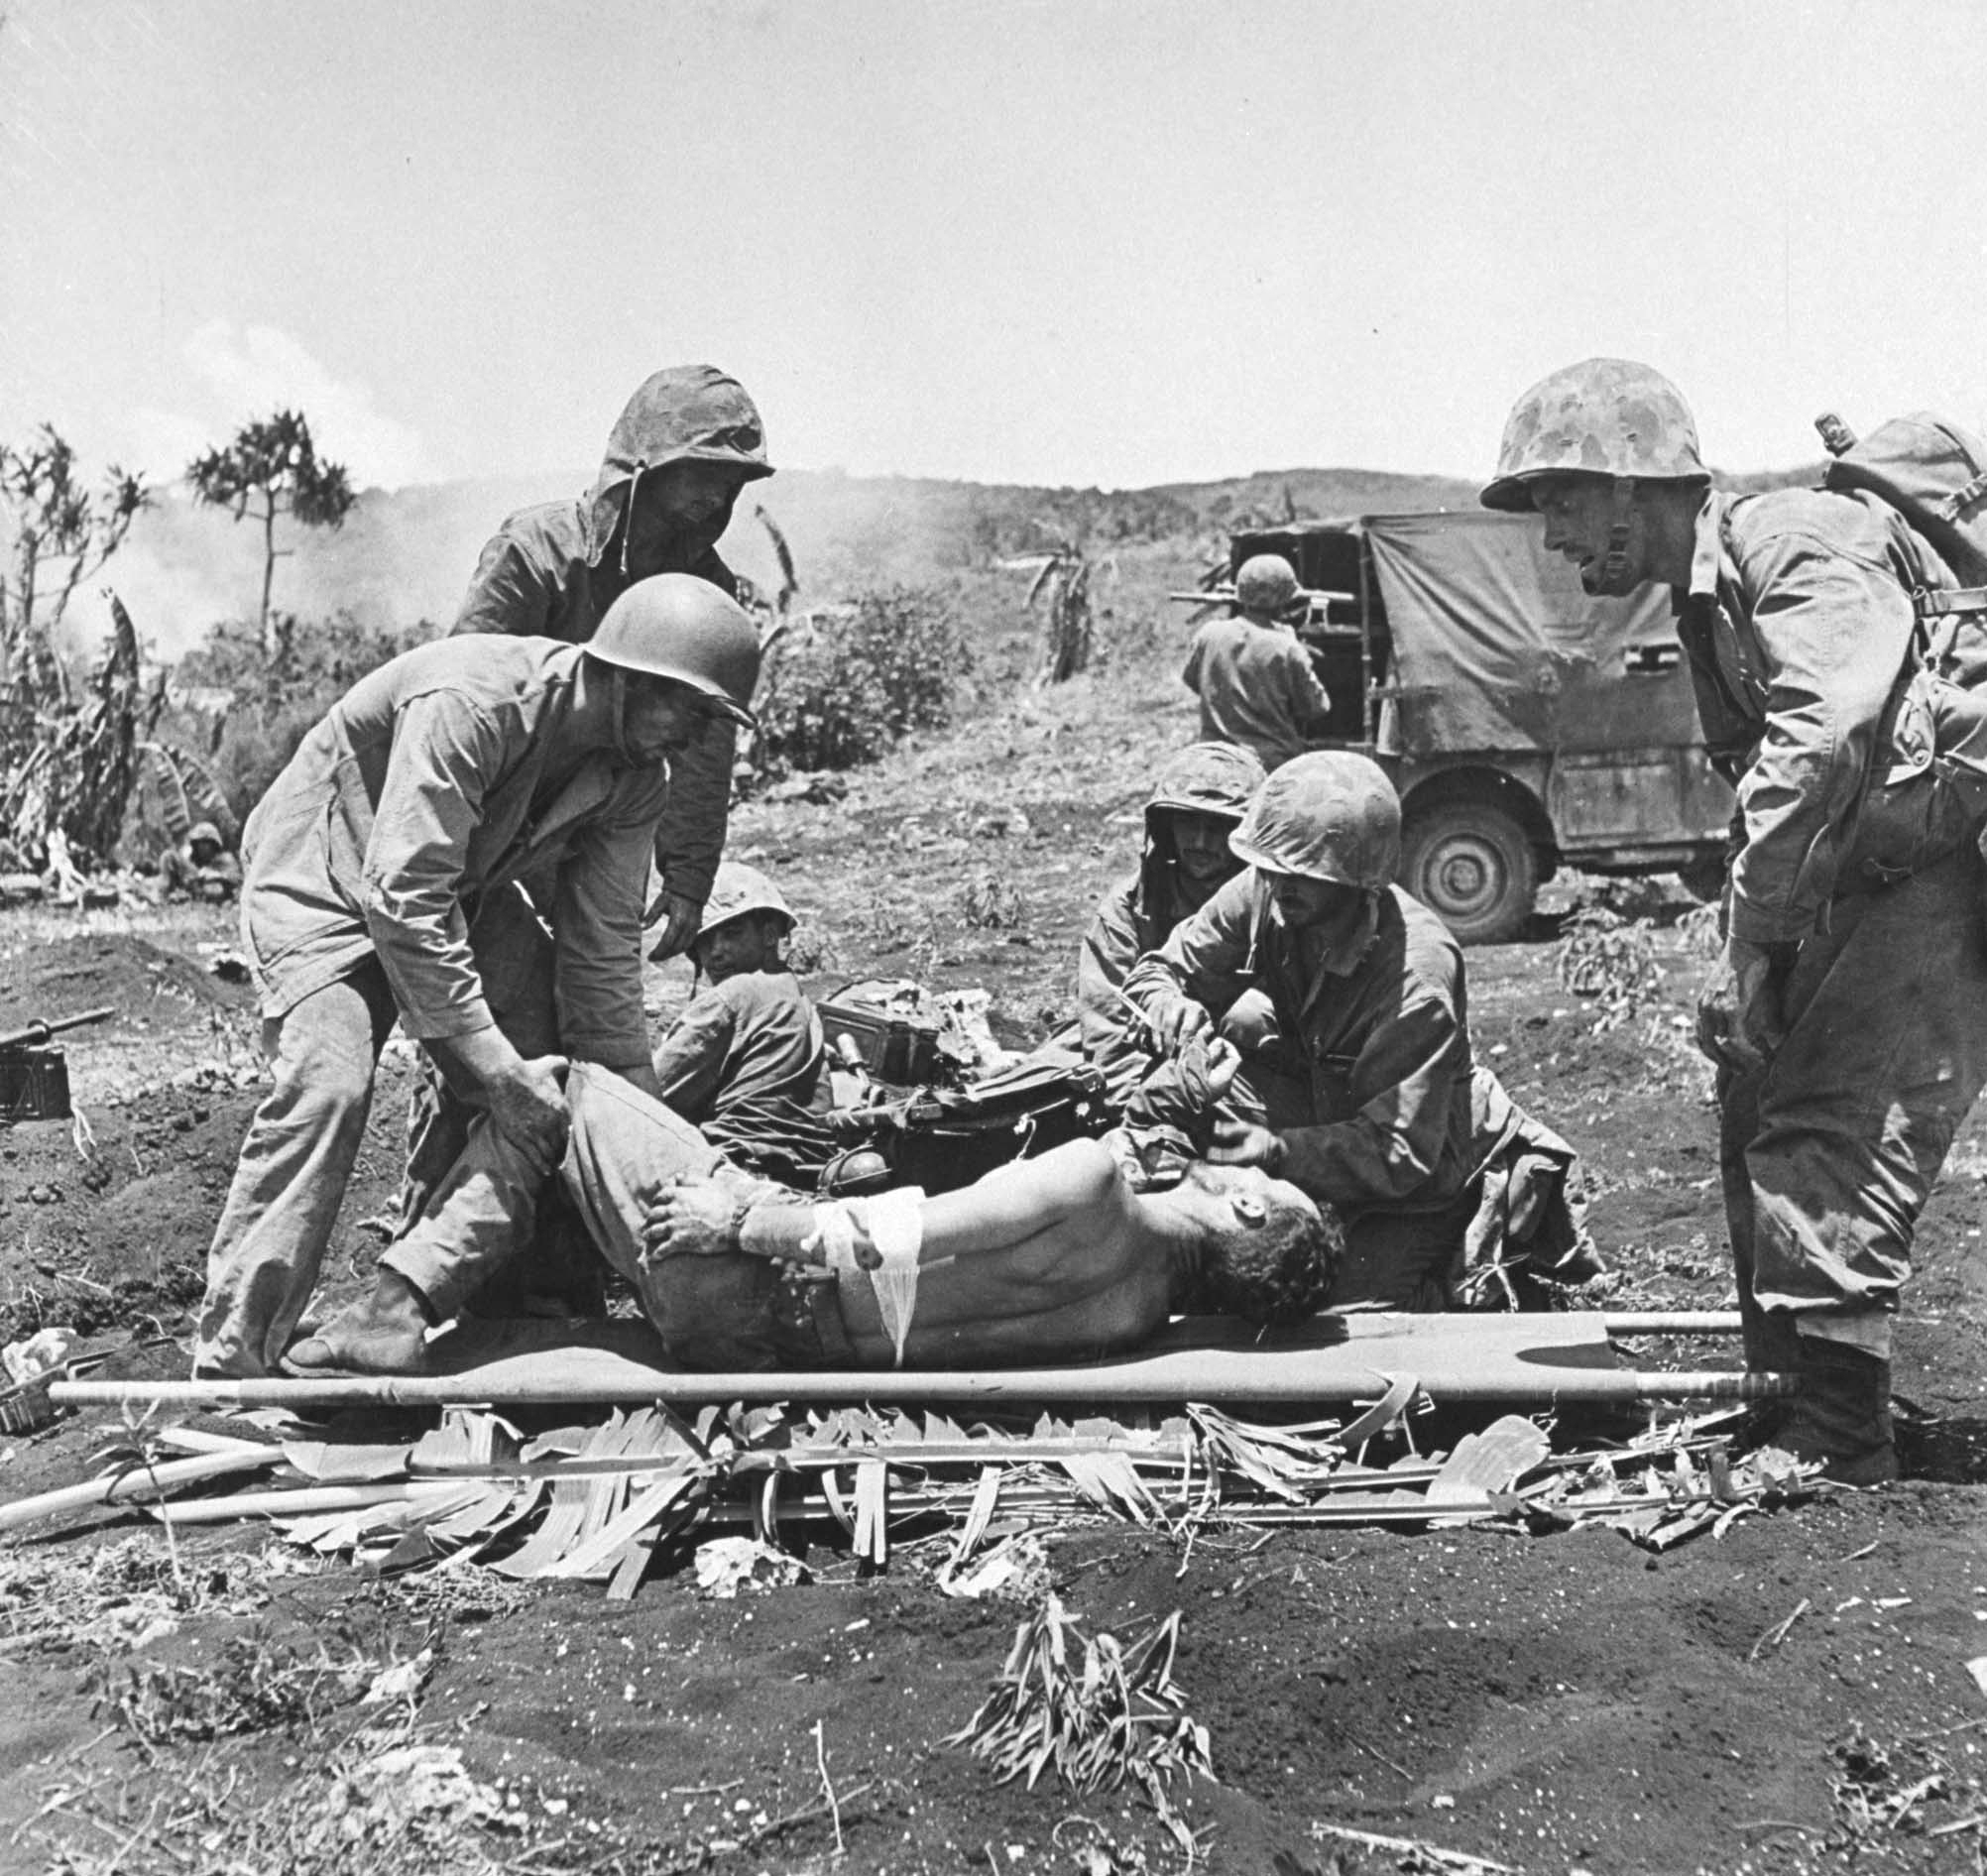 Marines tend to wounded comrades during the battle to take Saipan from the Japanese, 1944.